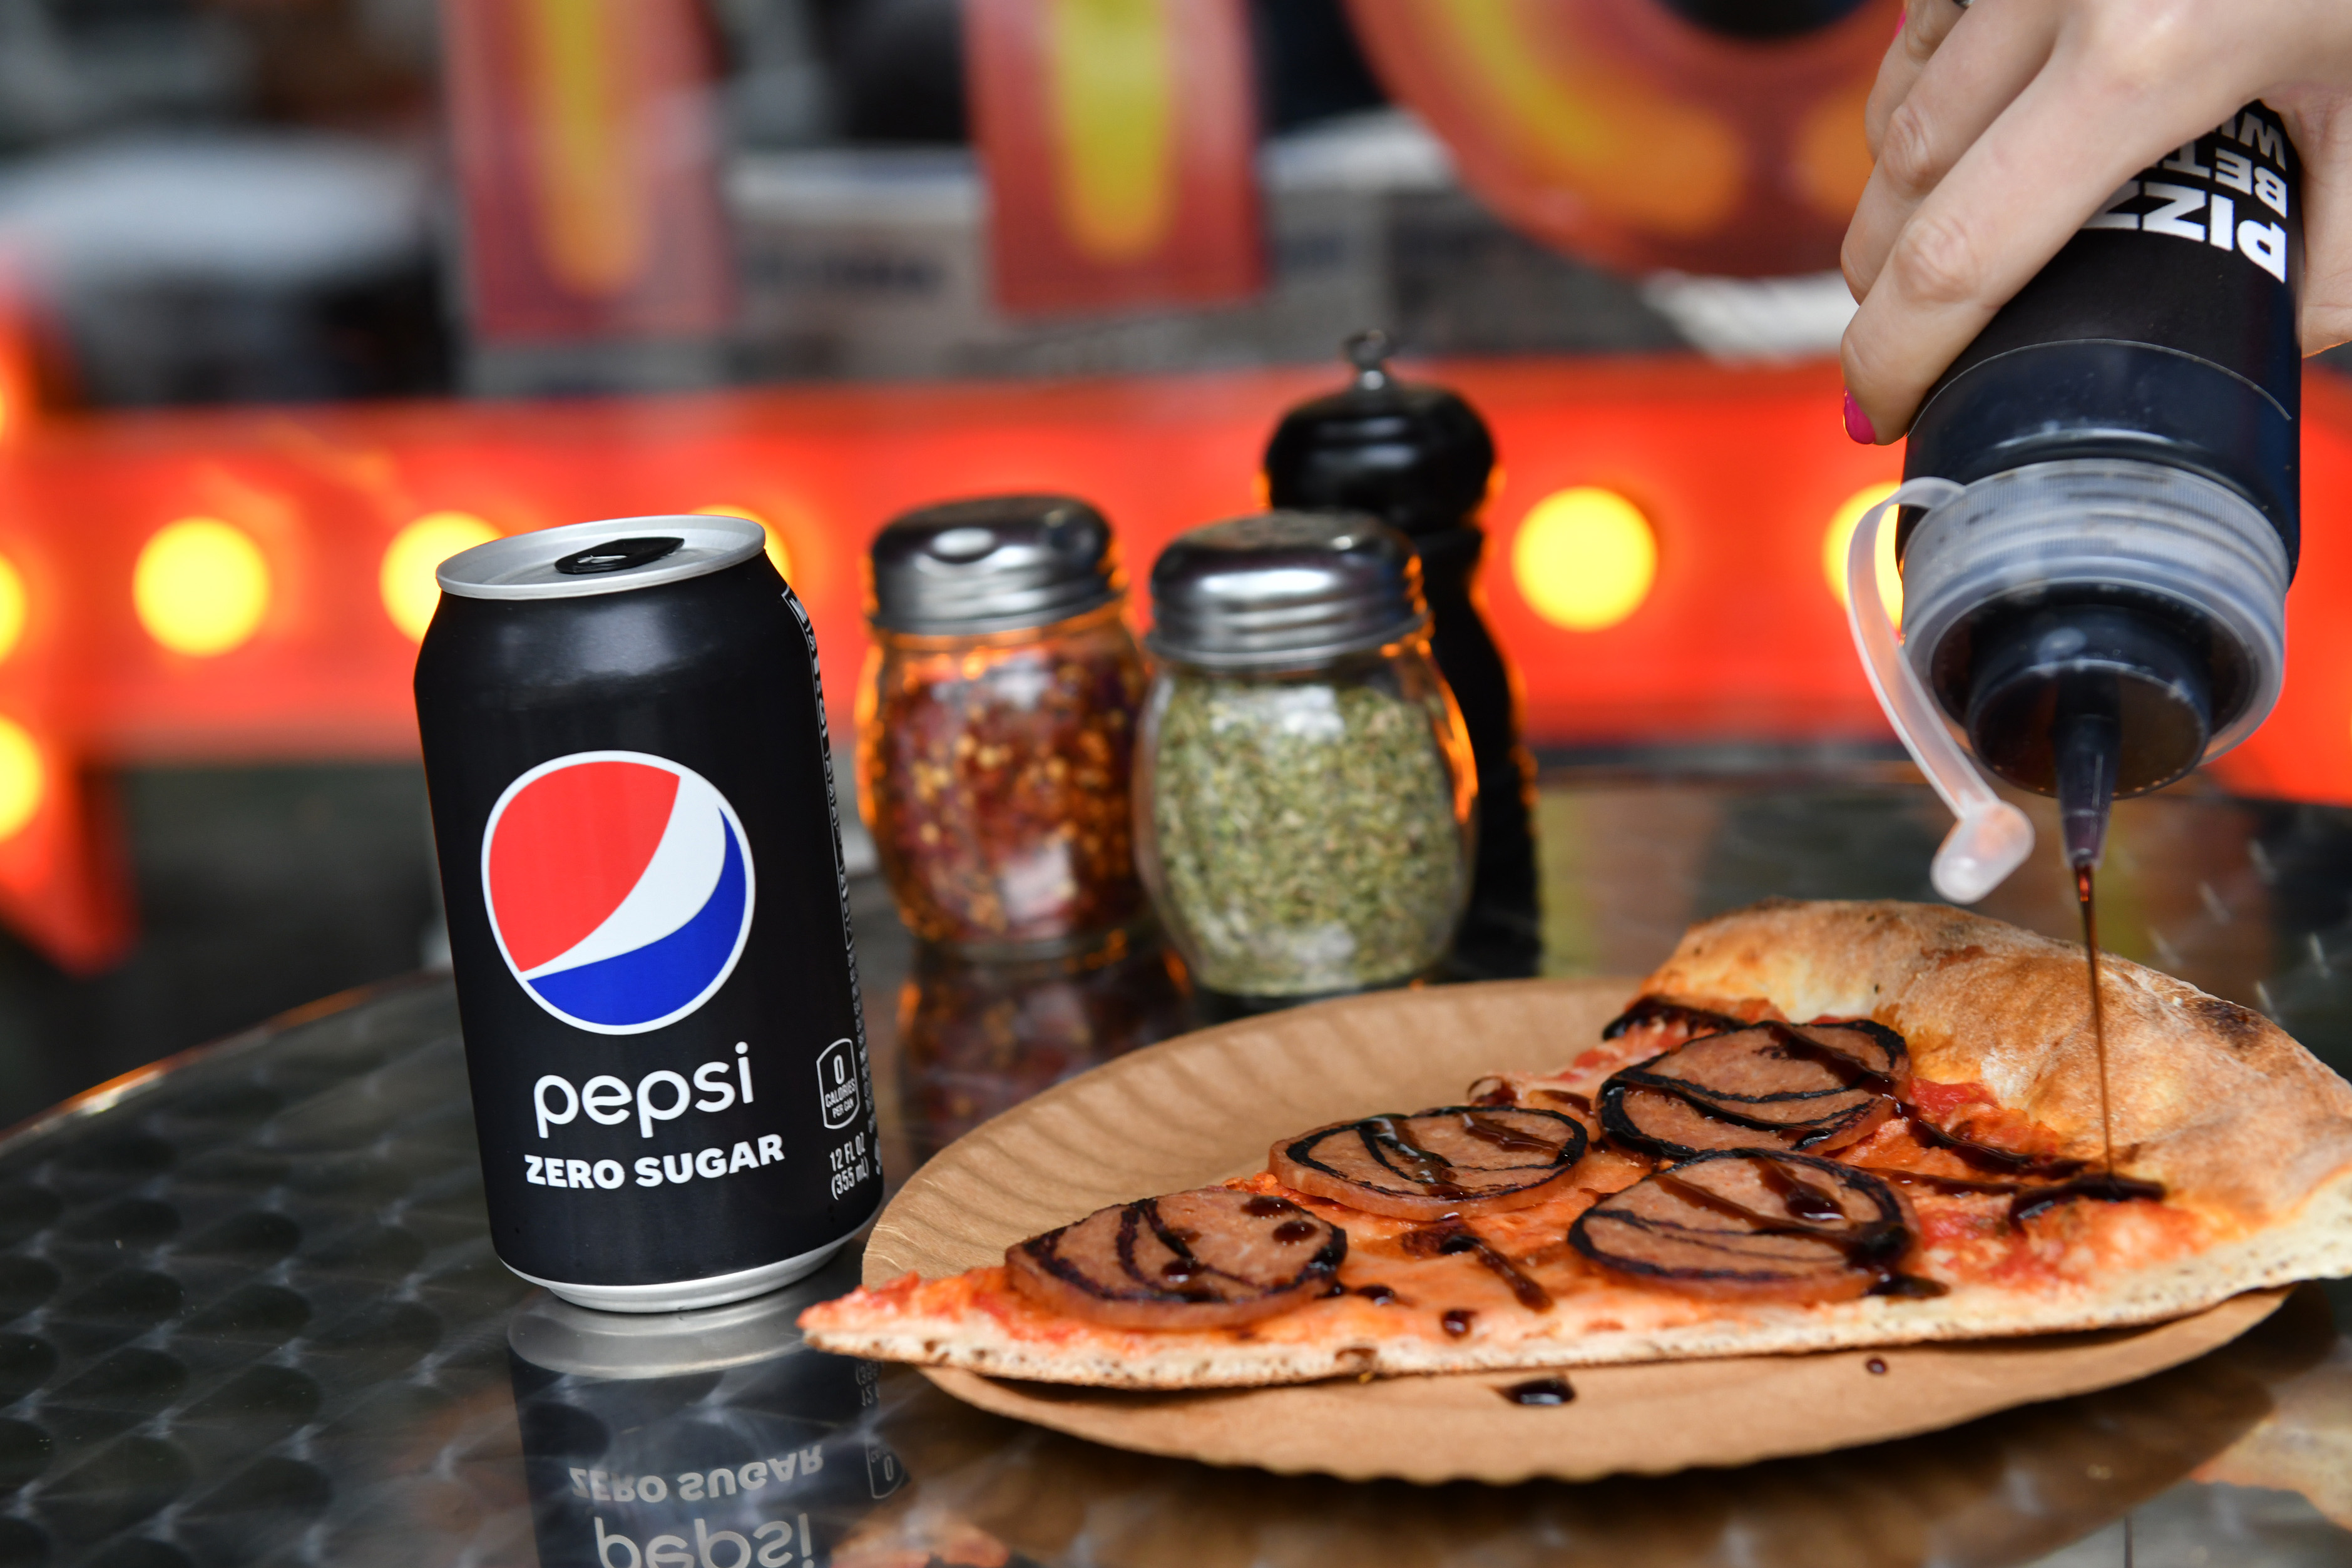 Here’s Where You Can Get A Free Slice Of ‘Pepsi-Roni’ Pizza In Metro Detroit This Friday